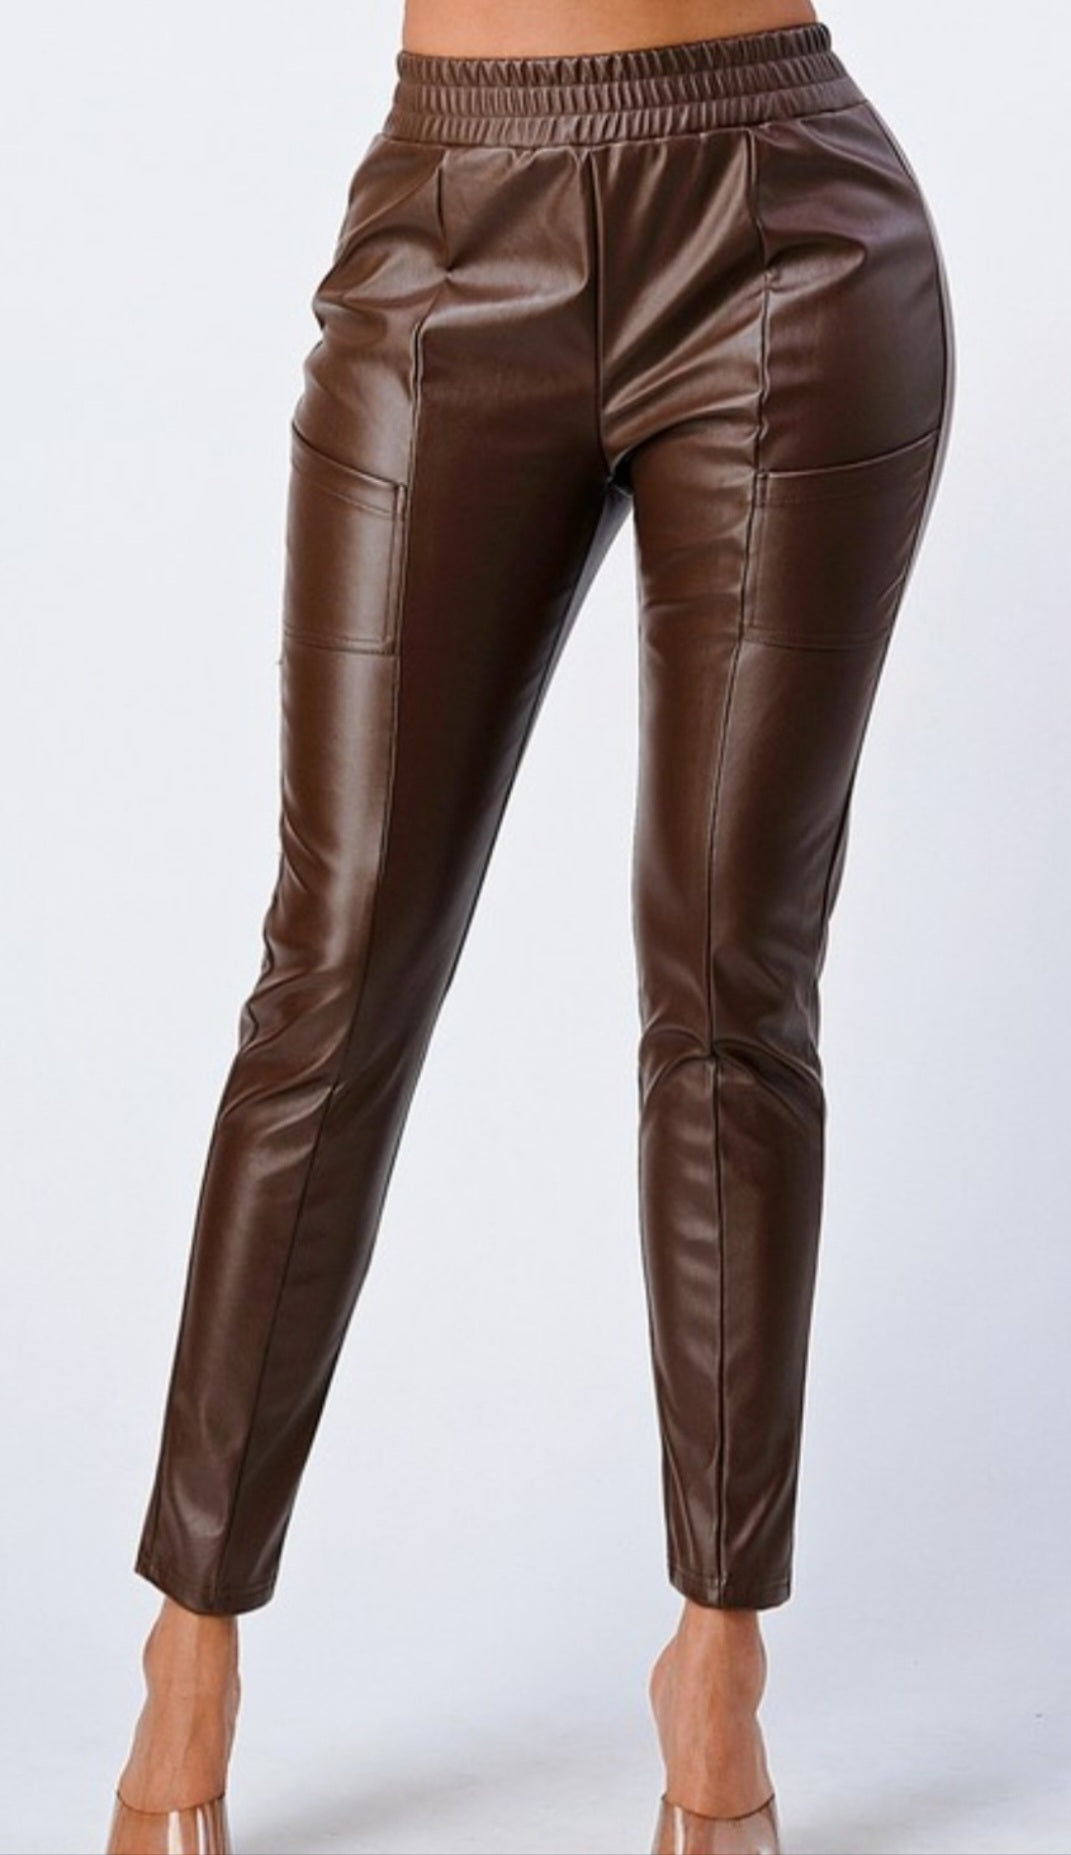 Stretchy Faux Leather Pleather leggings